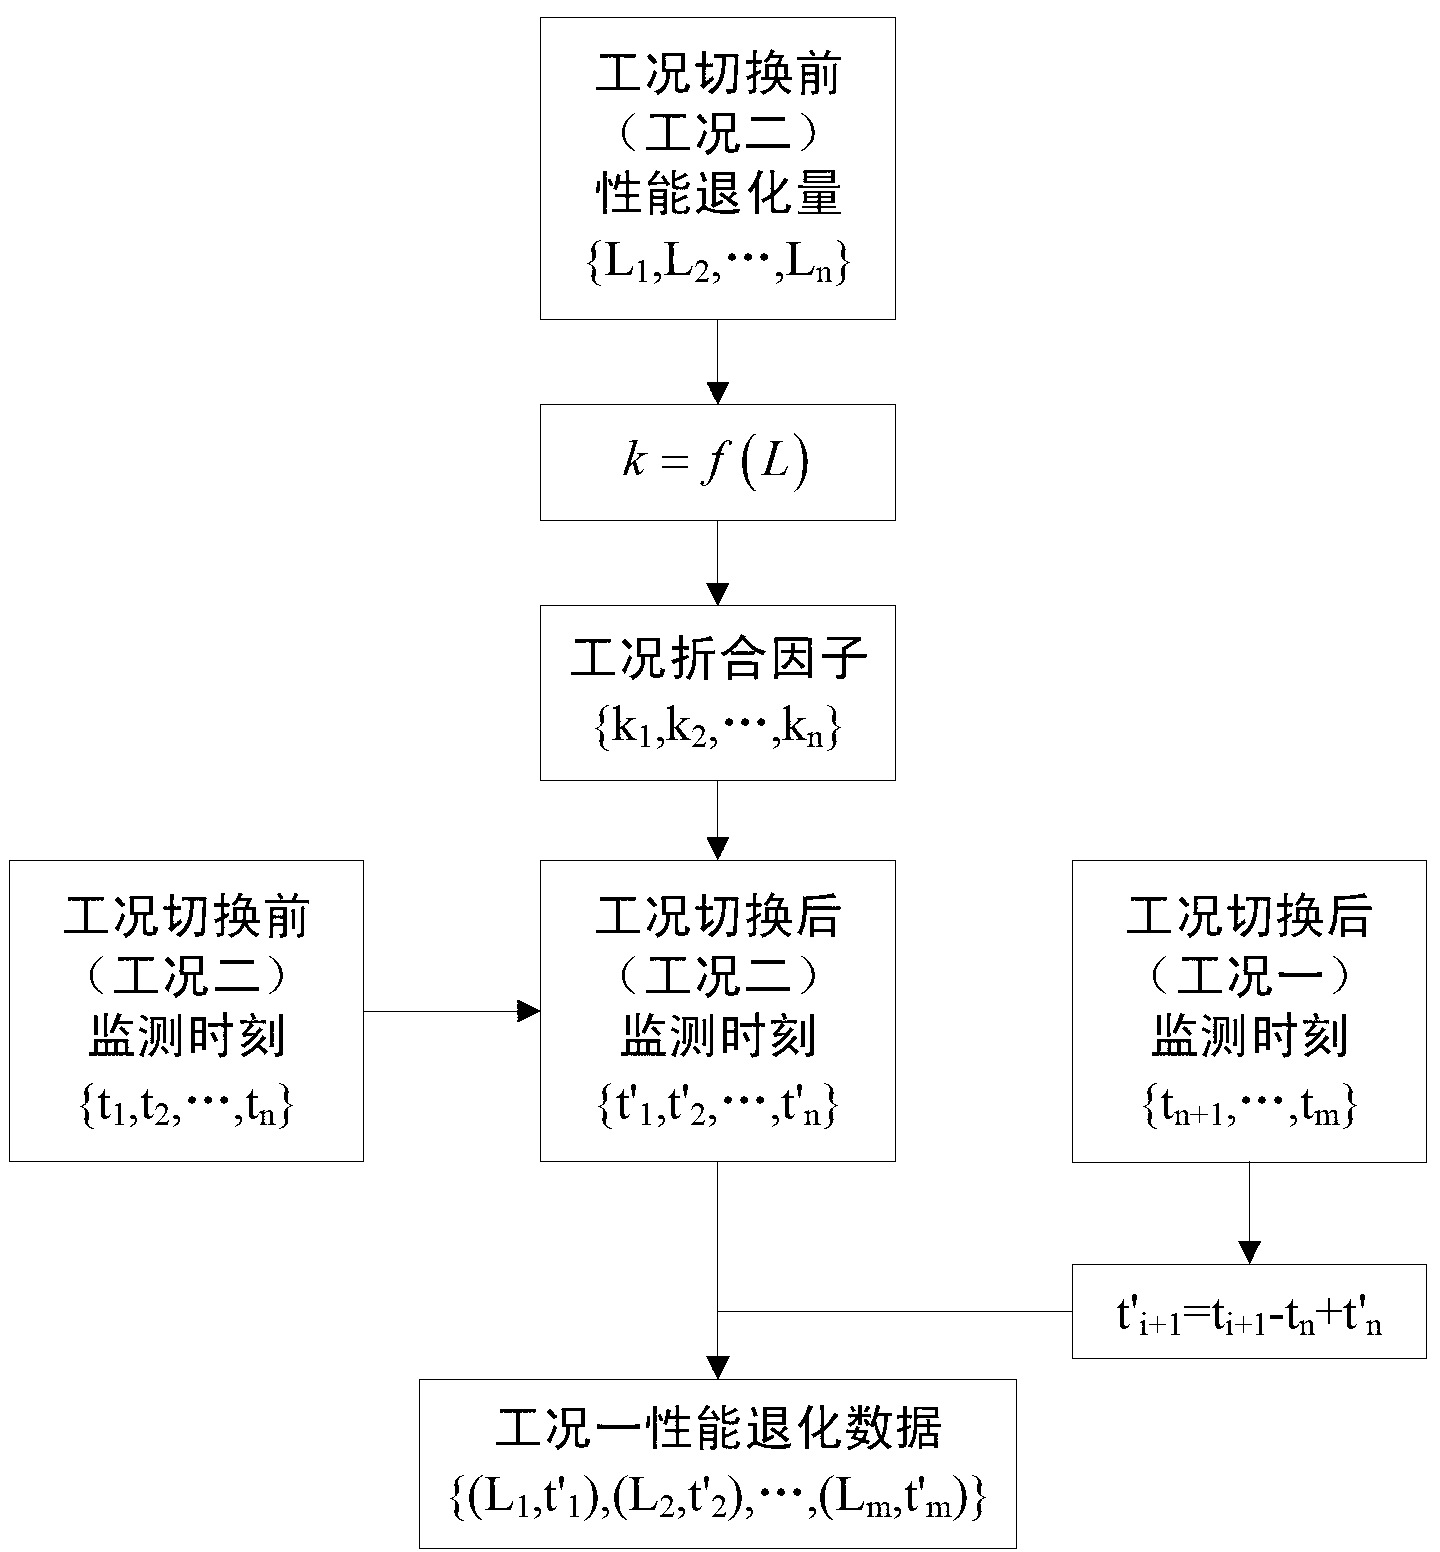 Method for assessing dynamic reliability of lithium ion batteries on the basis of polynomial fitting and life distribution